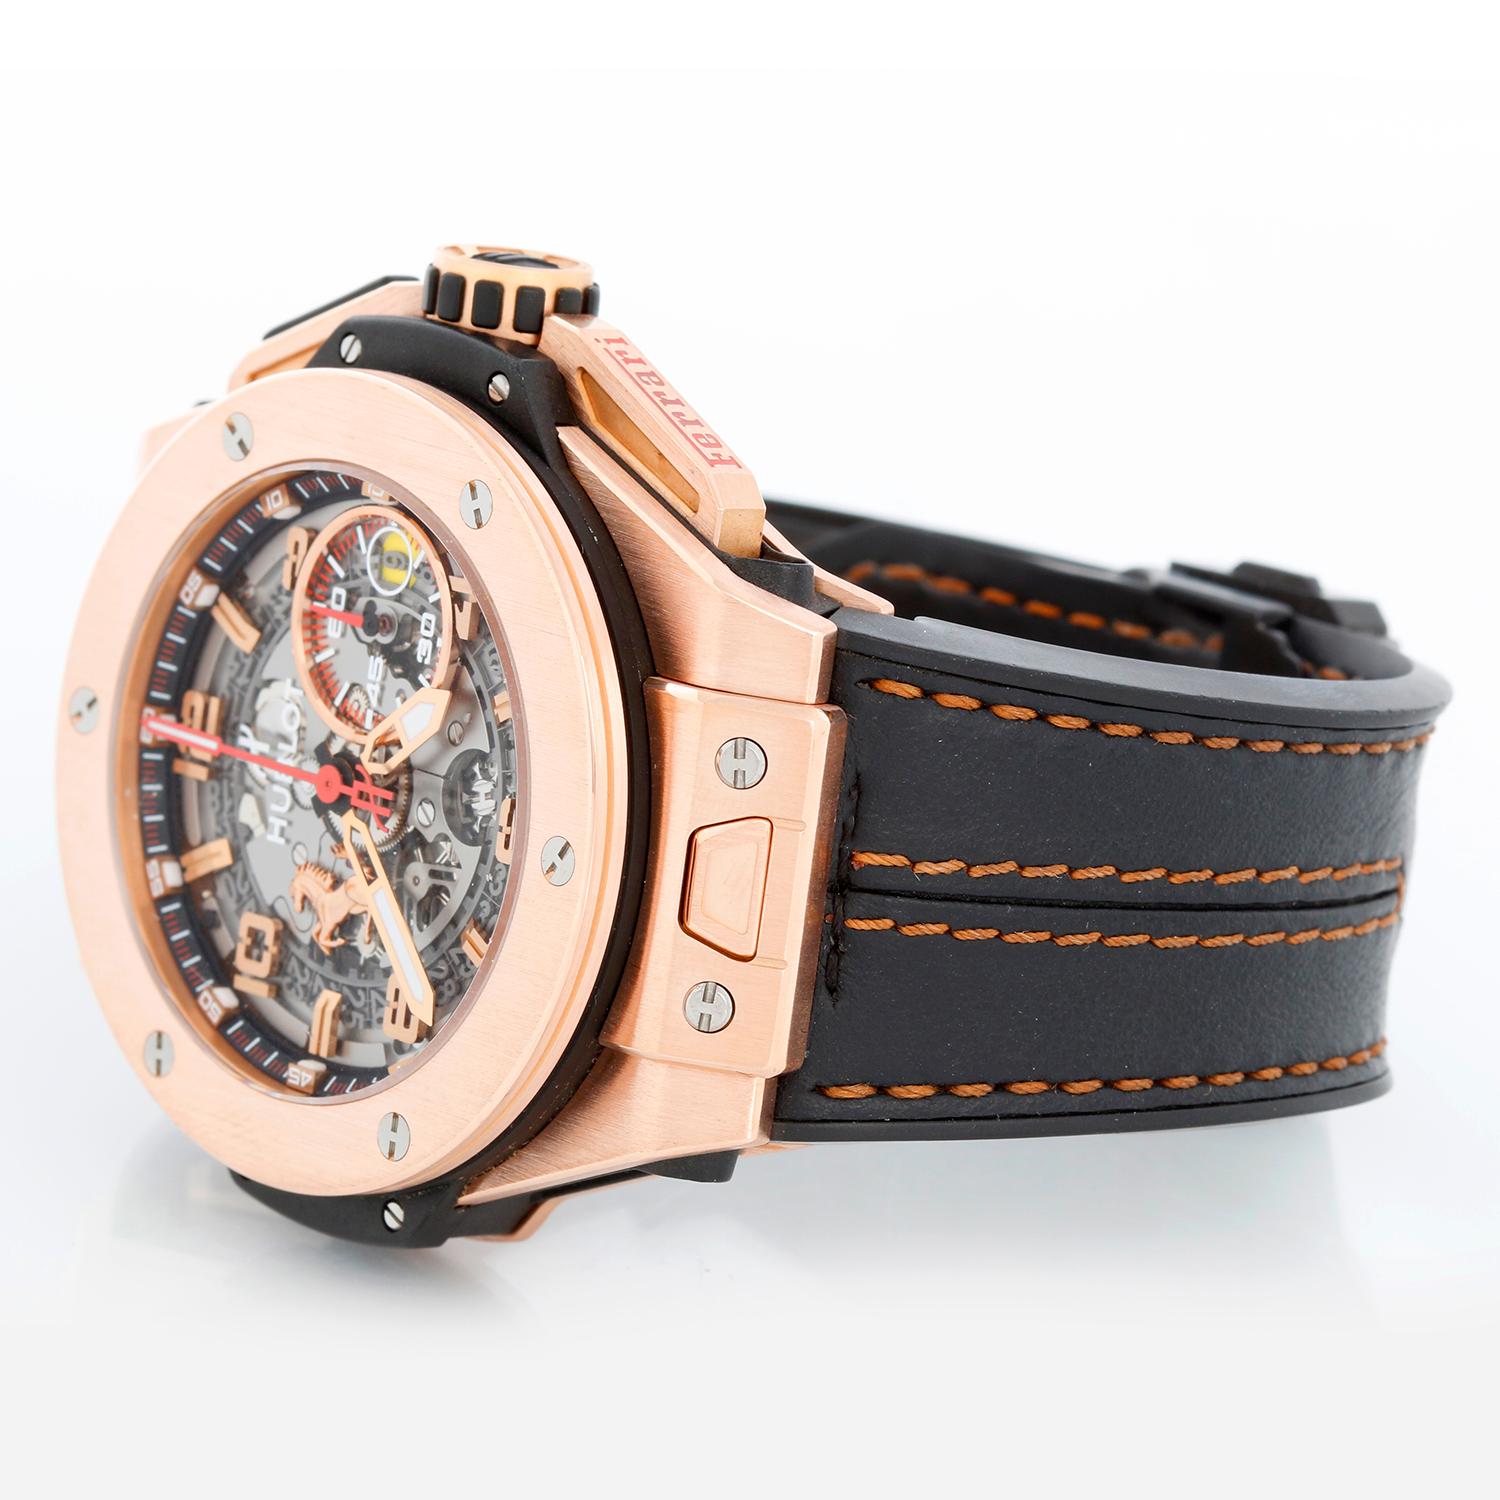 Hublot Big Bang Ferrari 18k Rose Gold Limited Edition Men's 45mm Chronograph Watch 401.OX.0123.VR - Automatic winding chronograph. 18k rose gold case with exposition back  (45mm diameter). Gray and rose gold skeletonized dial; hour, minute, seconds